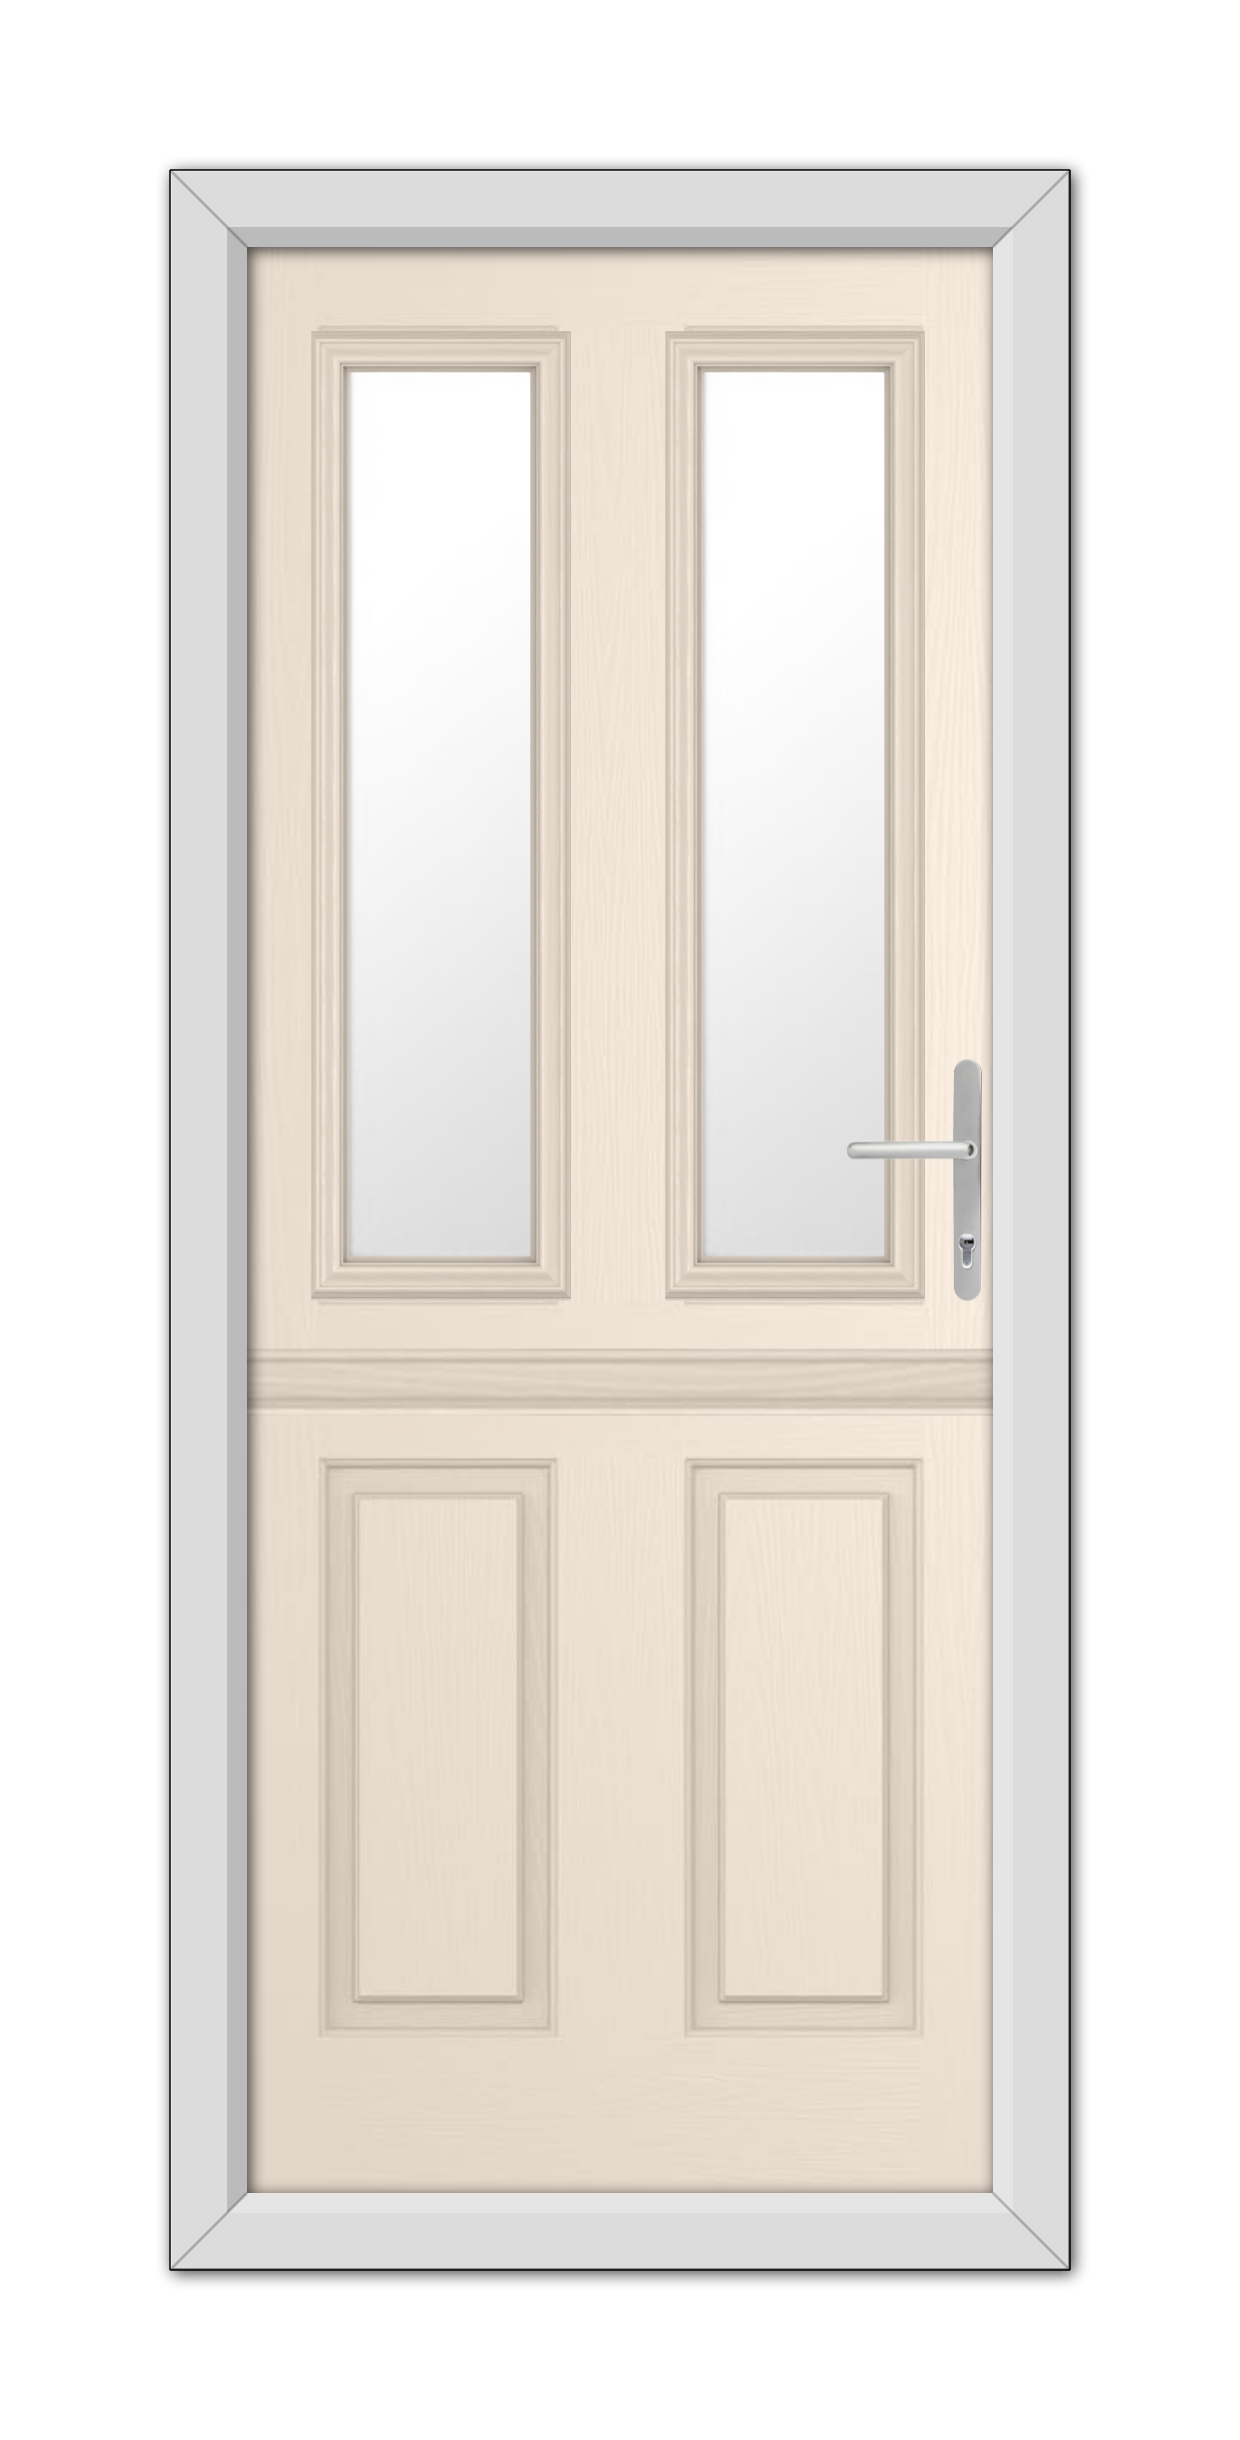 A modern Cream Whitmore Stable Composite Door 48mm Timber Core with glass panels on the upper half and a silver handle on the right side, set in a gray frame.